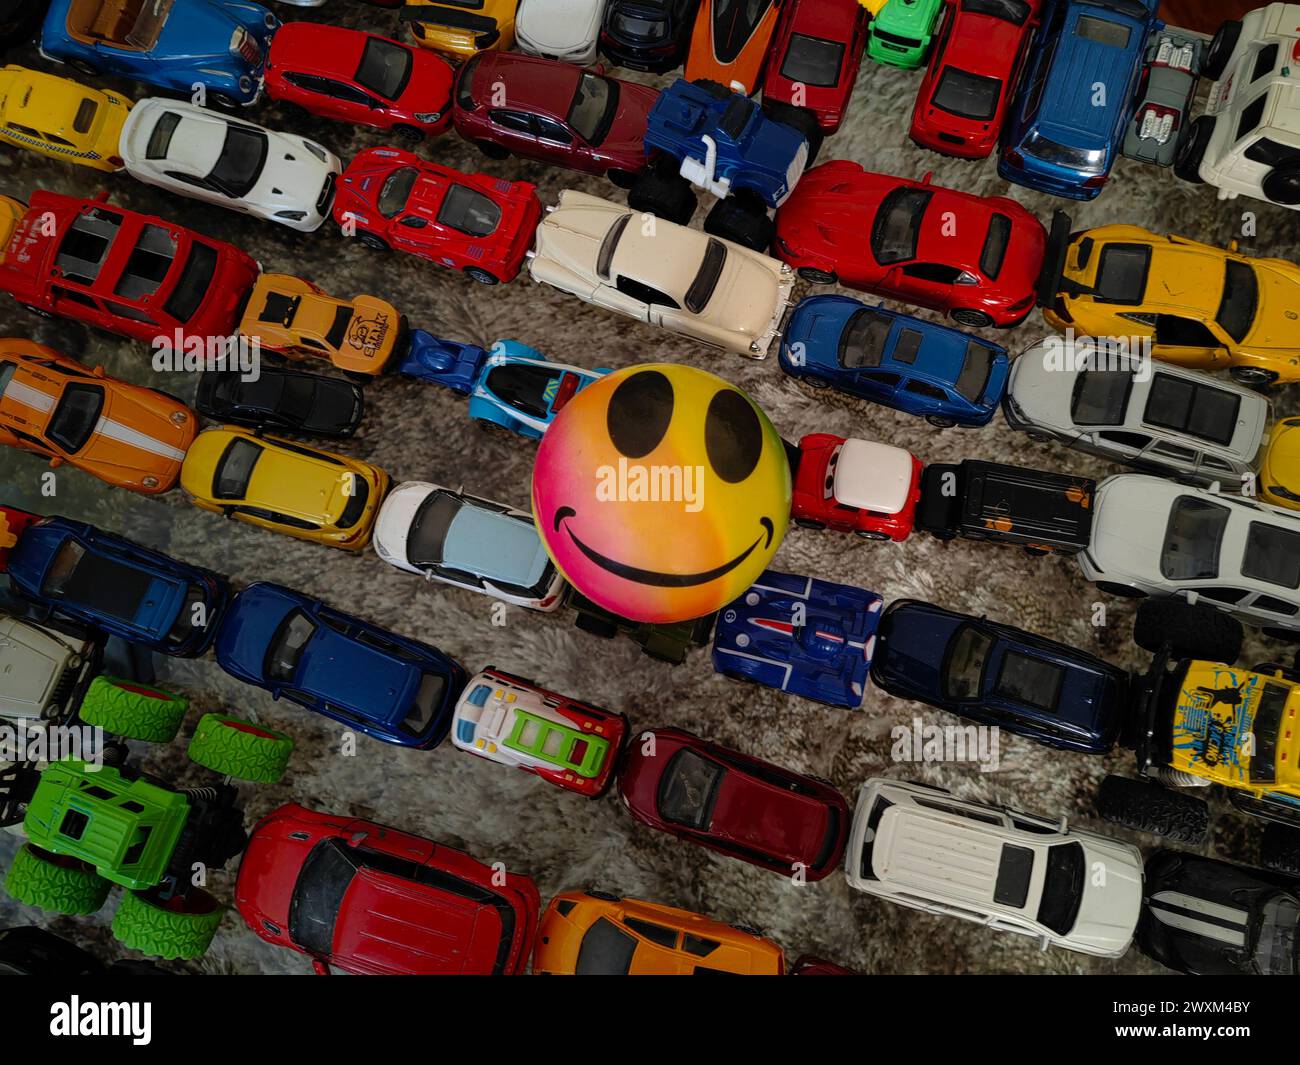 Stuck in traffic jam, concept. Child's play. Always be happy, and smile. Don't worry. Part of growth.  Round ball with smiley emotion. Many toy cars. Stock Photo